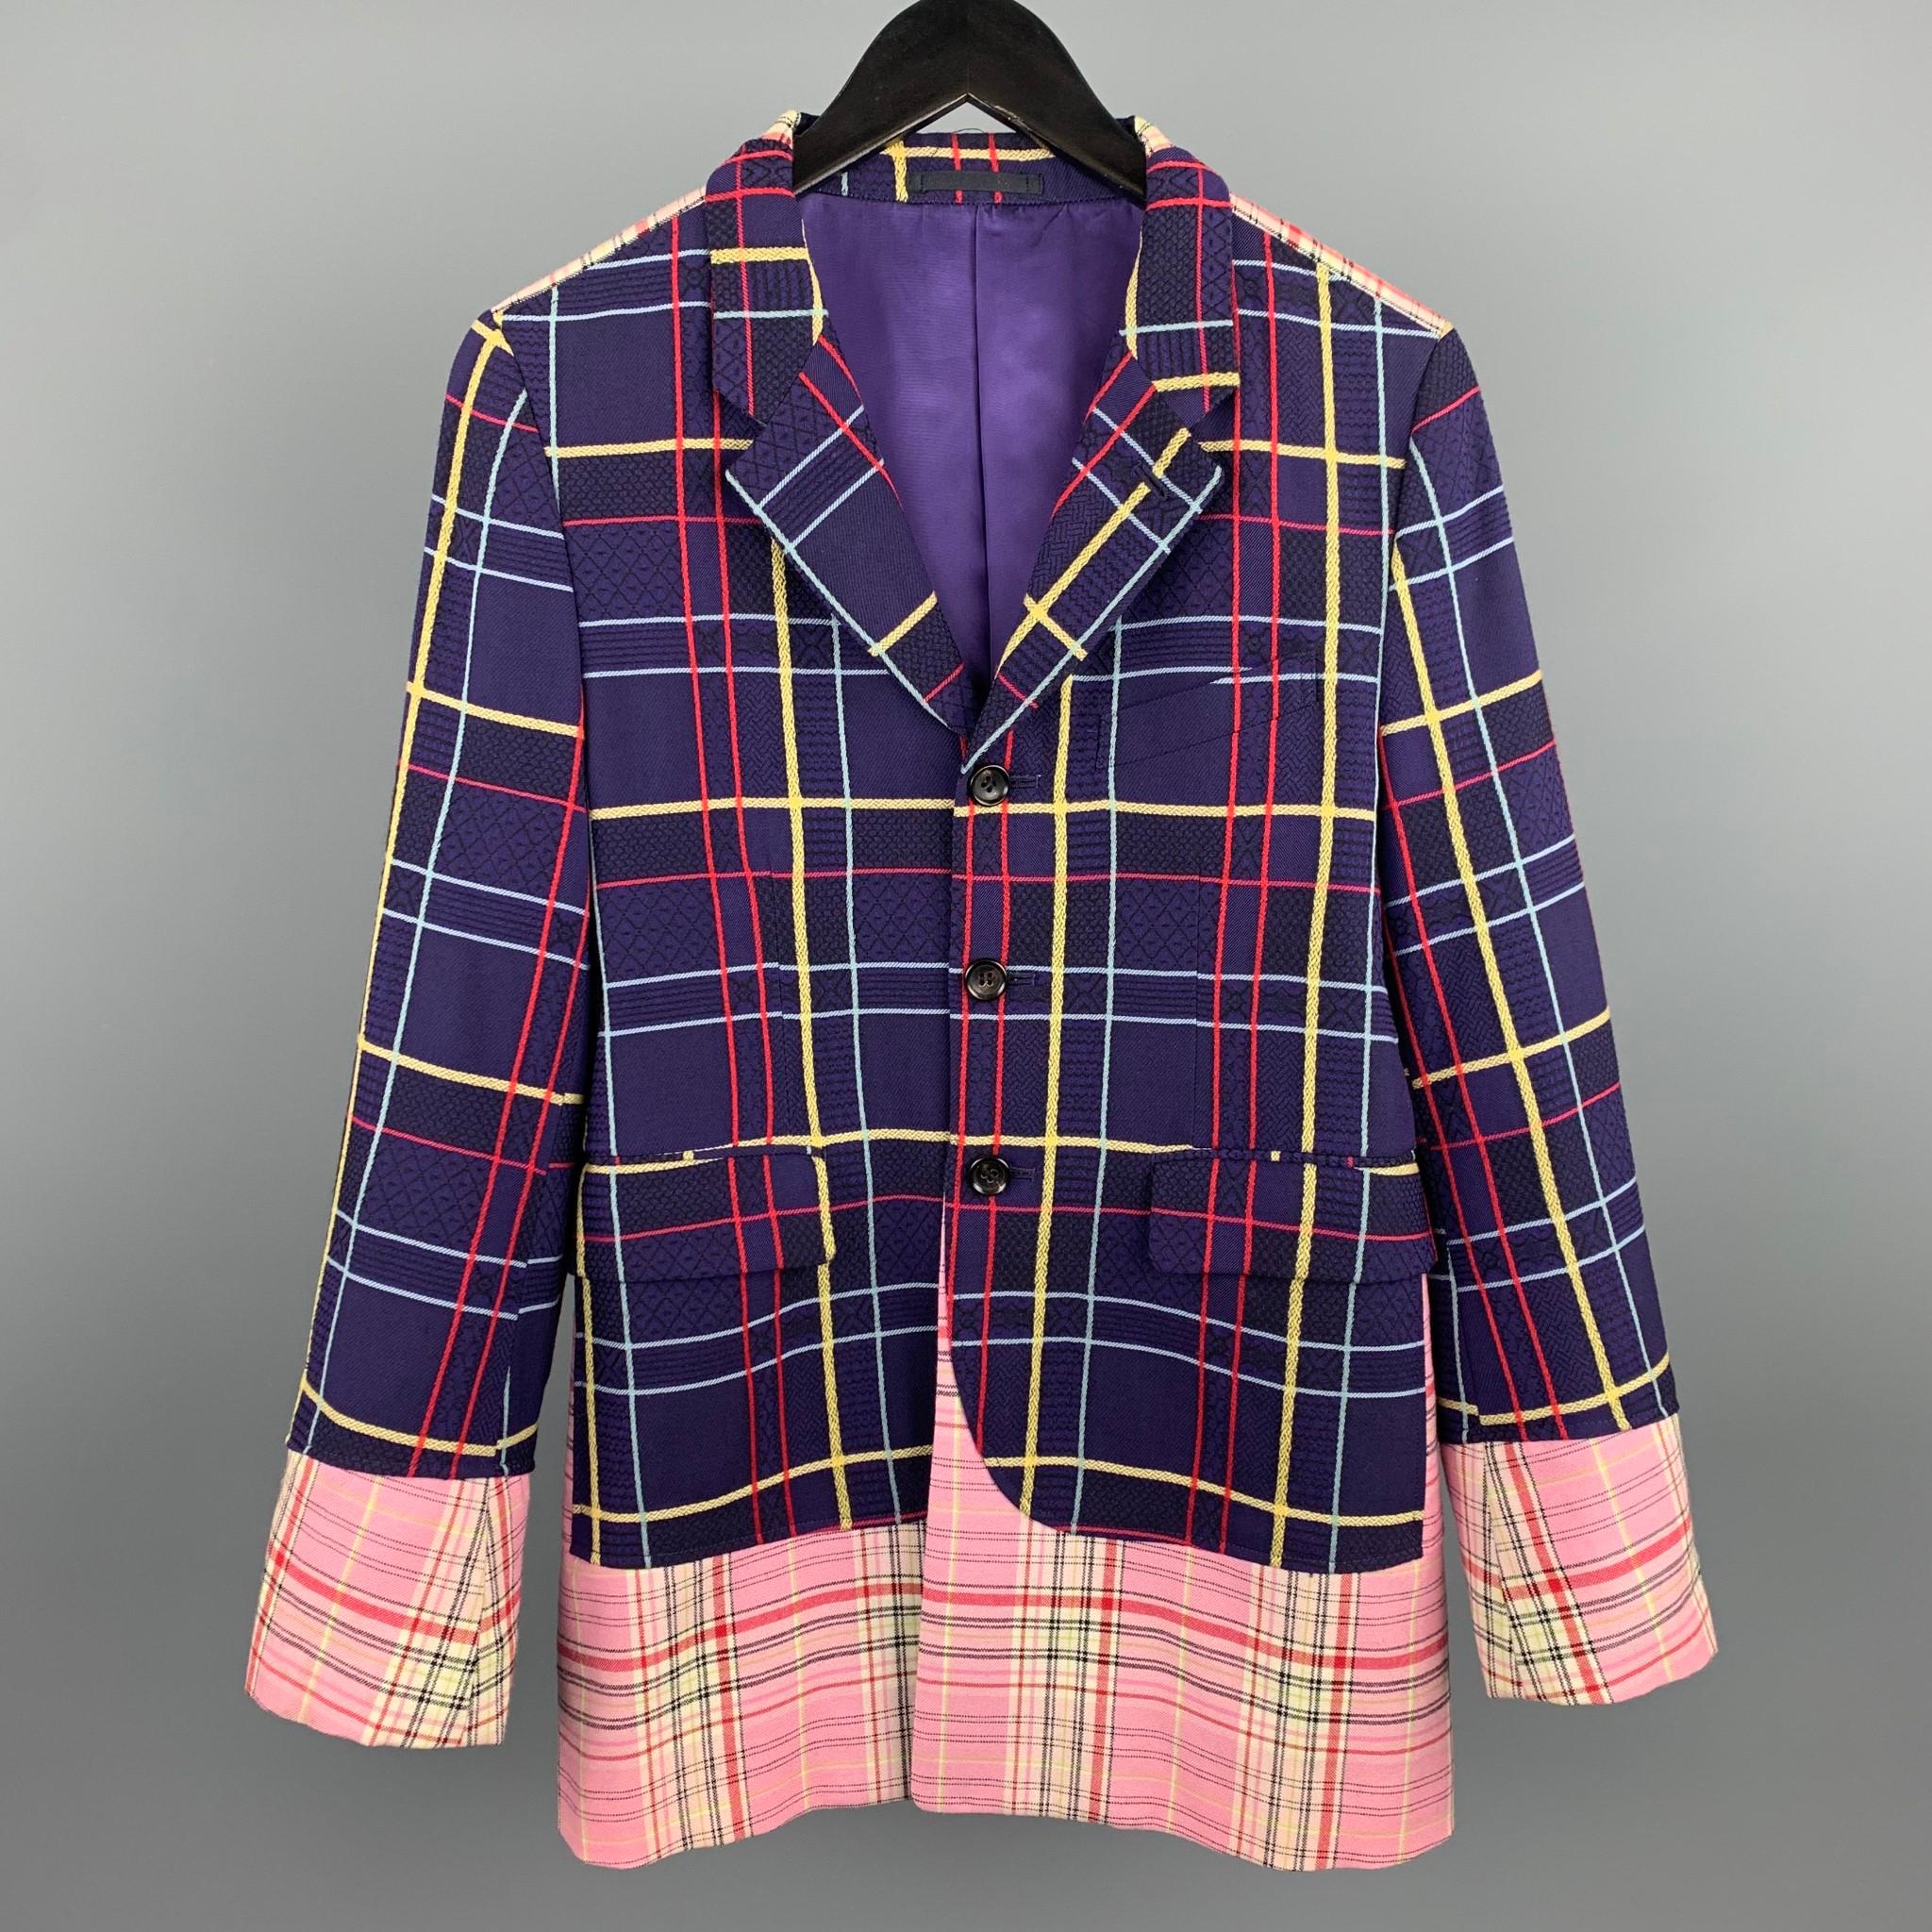 This rare vintage COMME des GARCONS HOMME PLUS AD2000 Docking mixed plaid suit comes in a bold purple, red and pink plaid textured wool with a notch lapel, single breasted three button front, bold purple lining, and pink plaid panels throughout. The